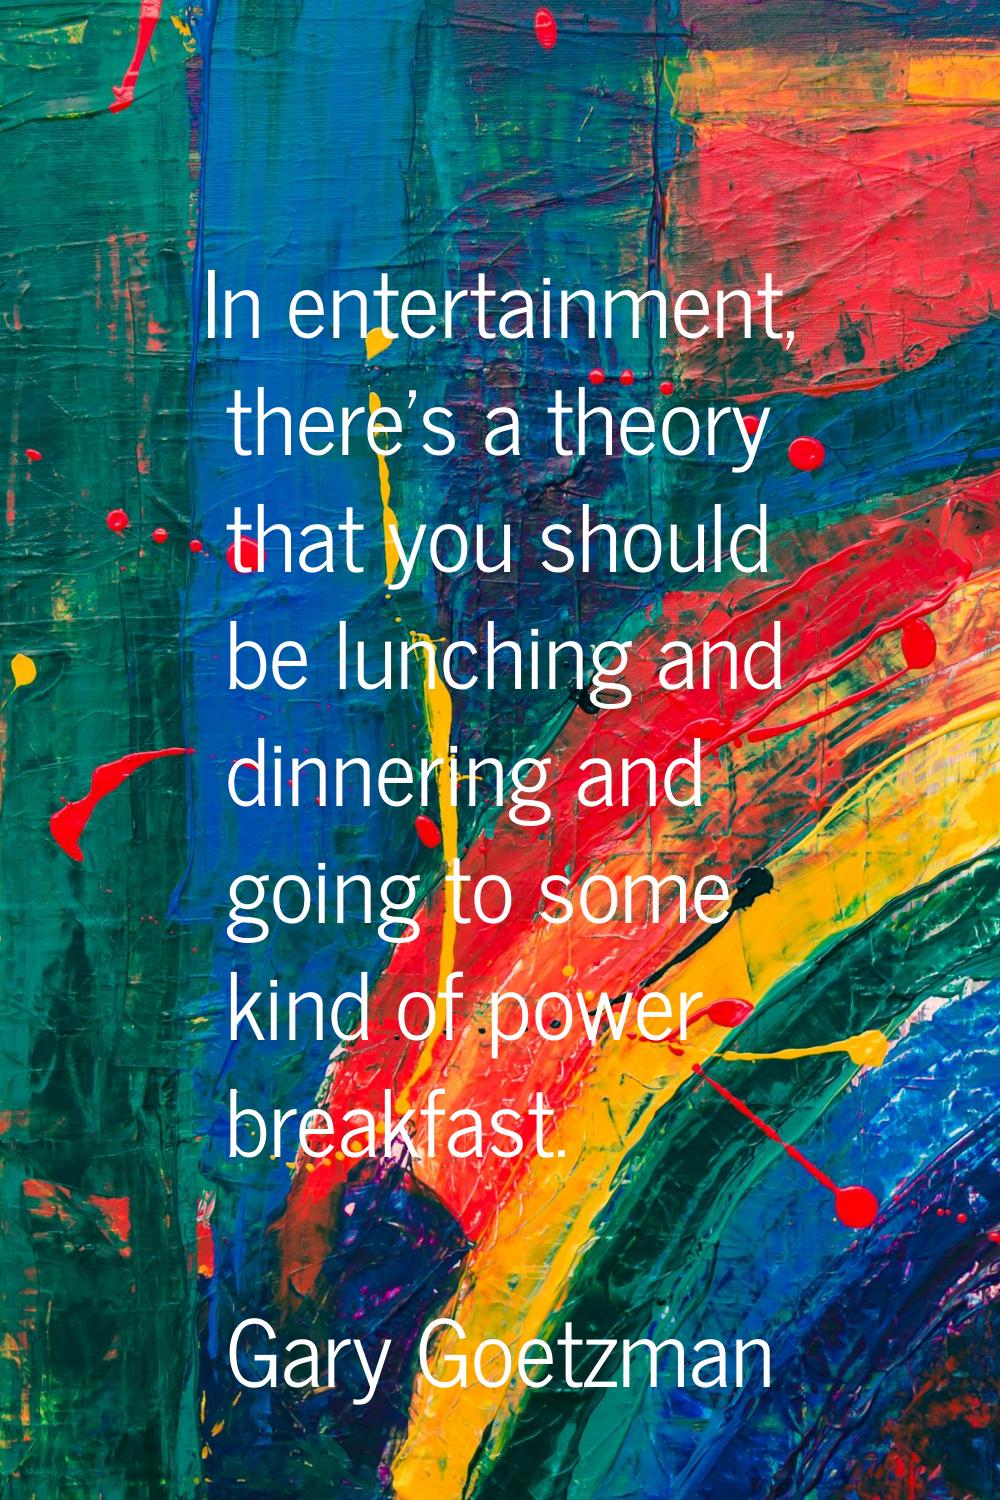 In entertainment, there's a theory that you should be lunching and dinnering and going to some kind